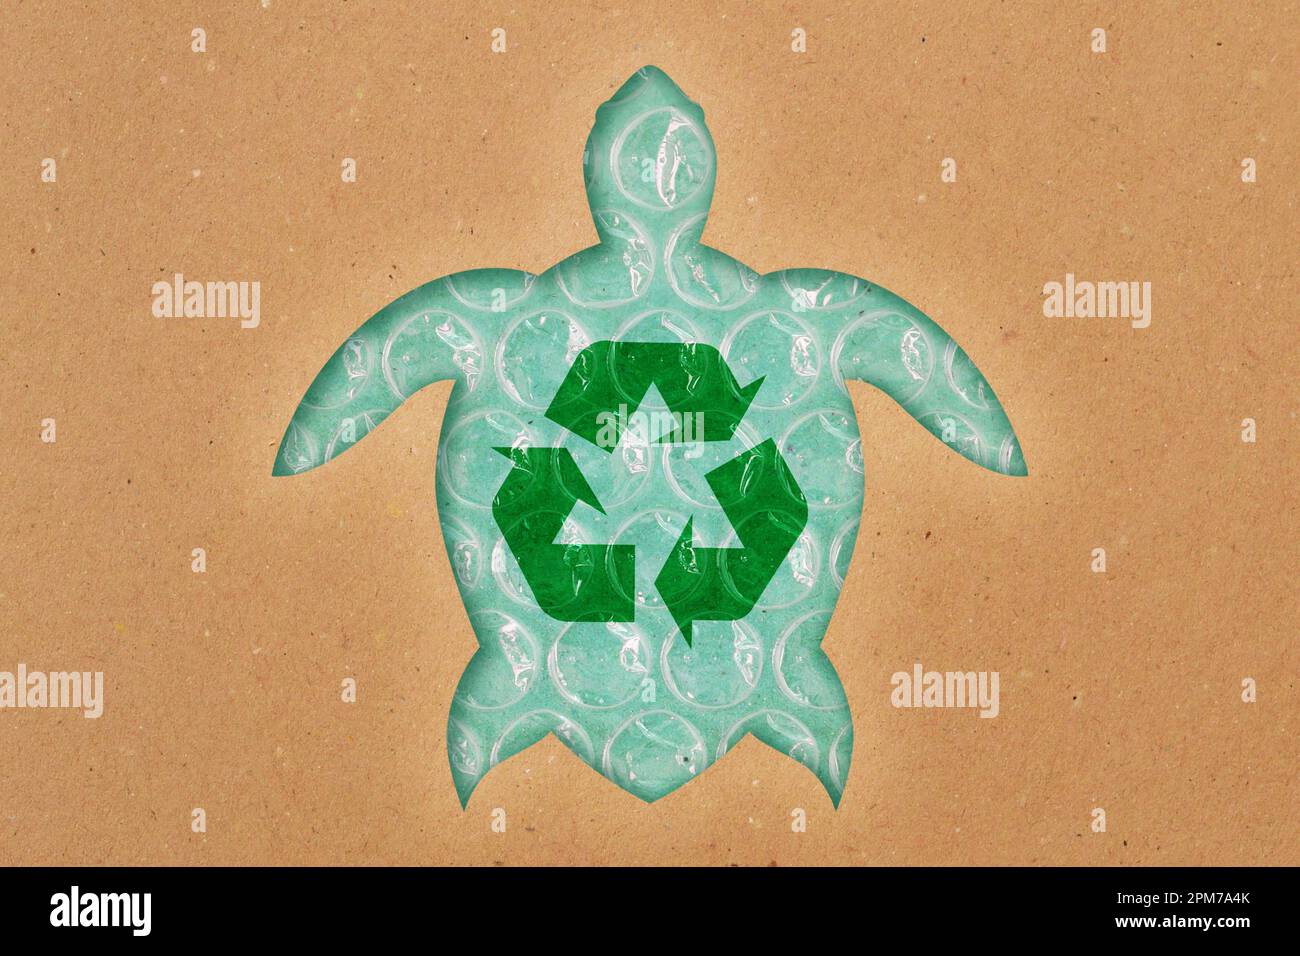 Sea turtle silhouette made of recycled paper with recycling symbol on plastic bubble wrap - Concept of ecology and ocean pollution Stock Photo